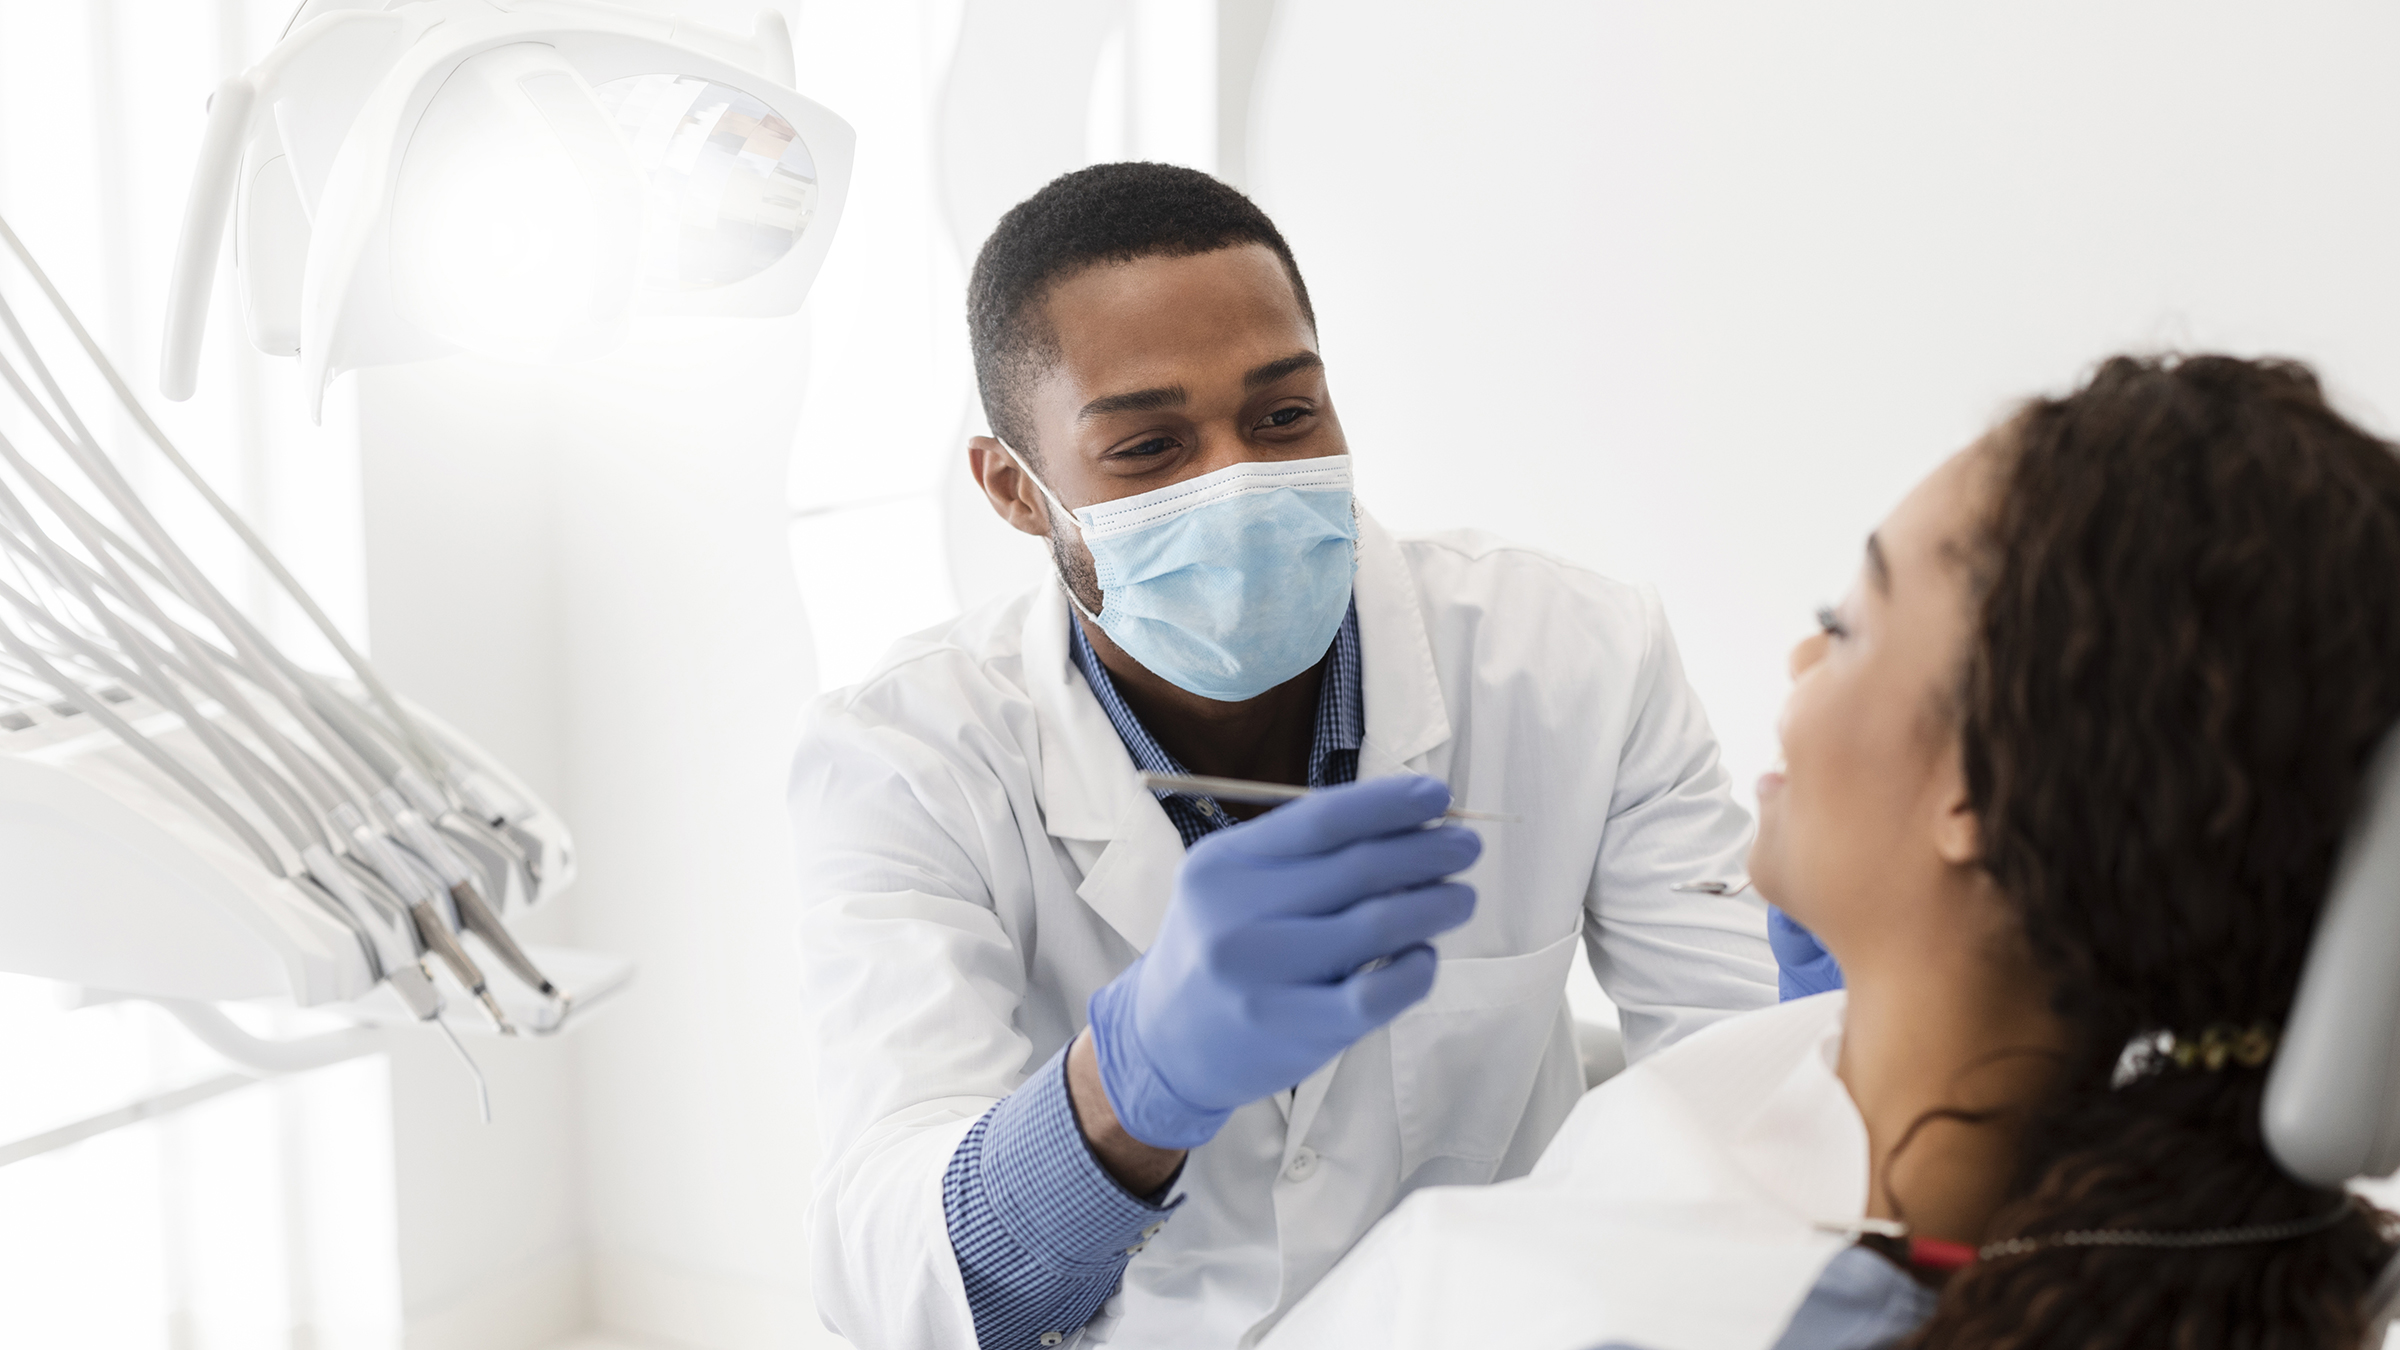 Can I Use My HSA to Pay for Dental Expenses? - GoodRx